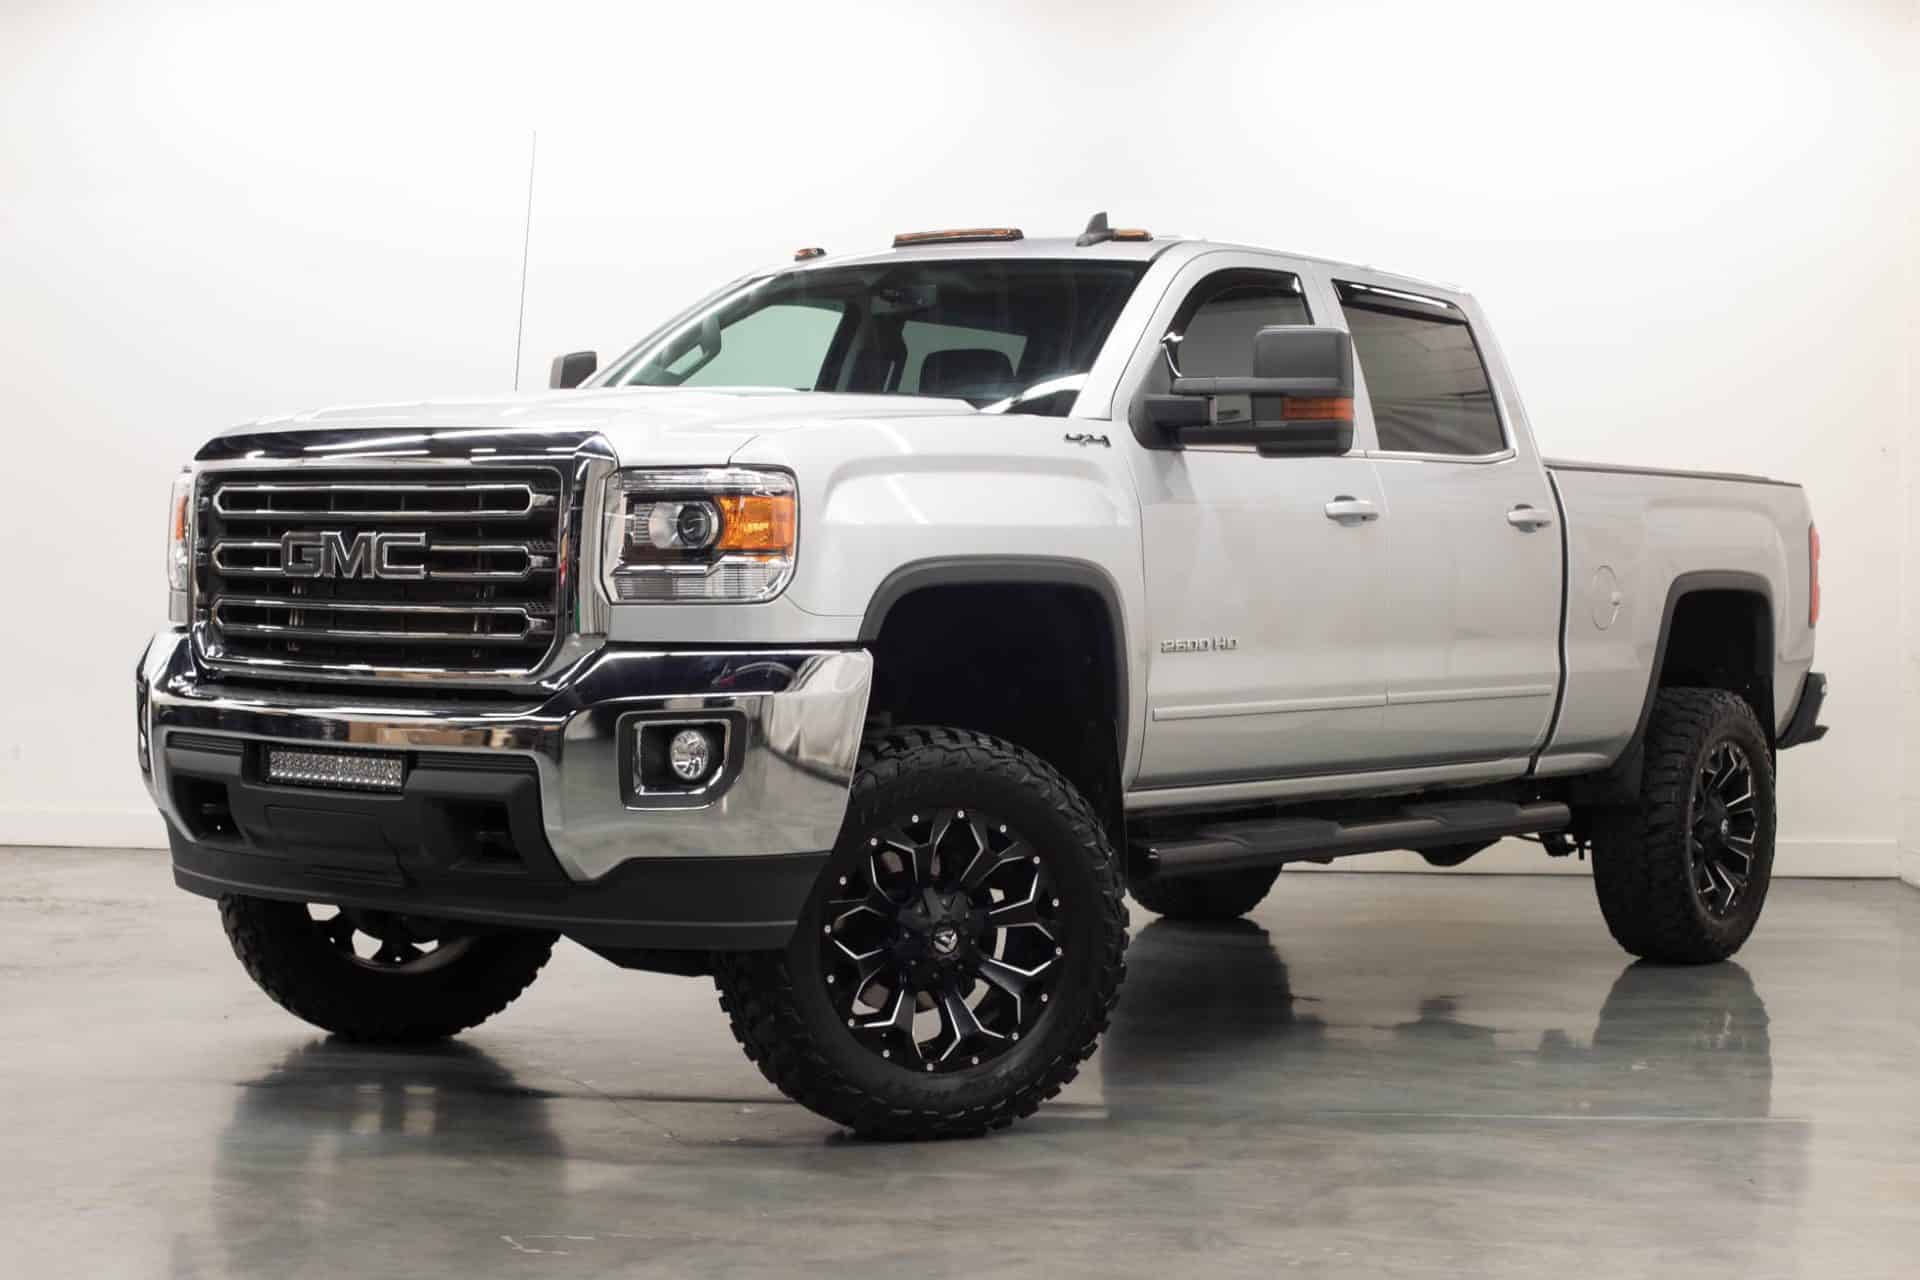 GMC Lifted Trucks for Sale